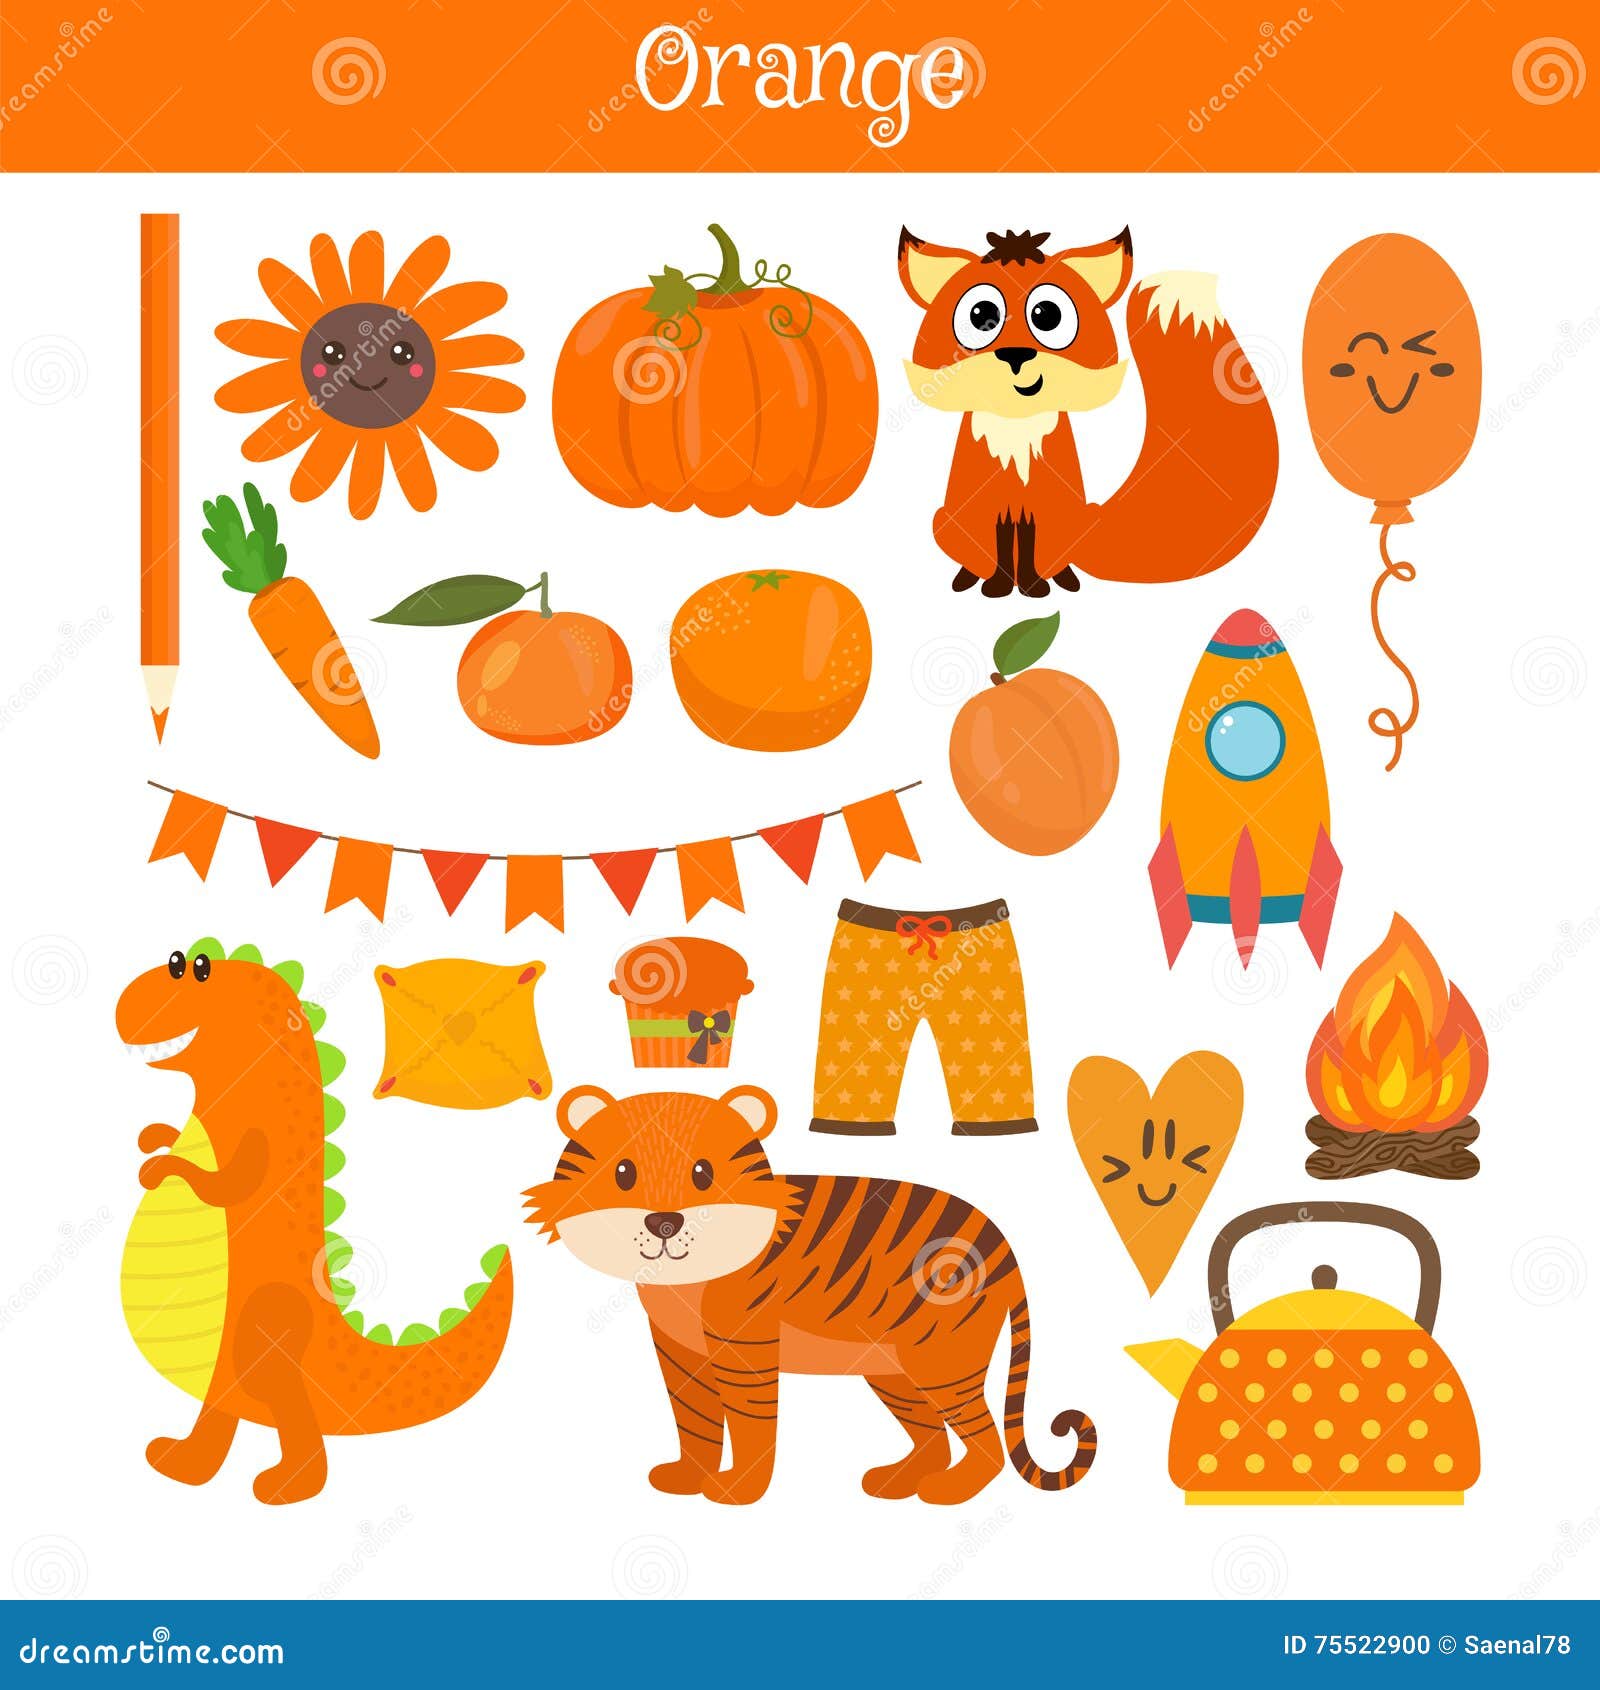 Orange. Learn the Color. Education Set. Illustration of Primary ...